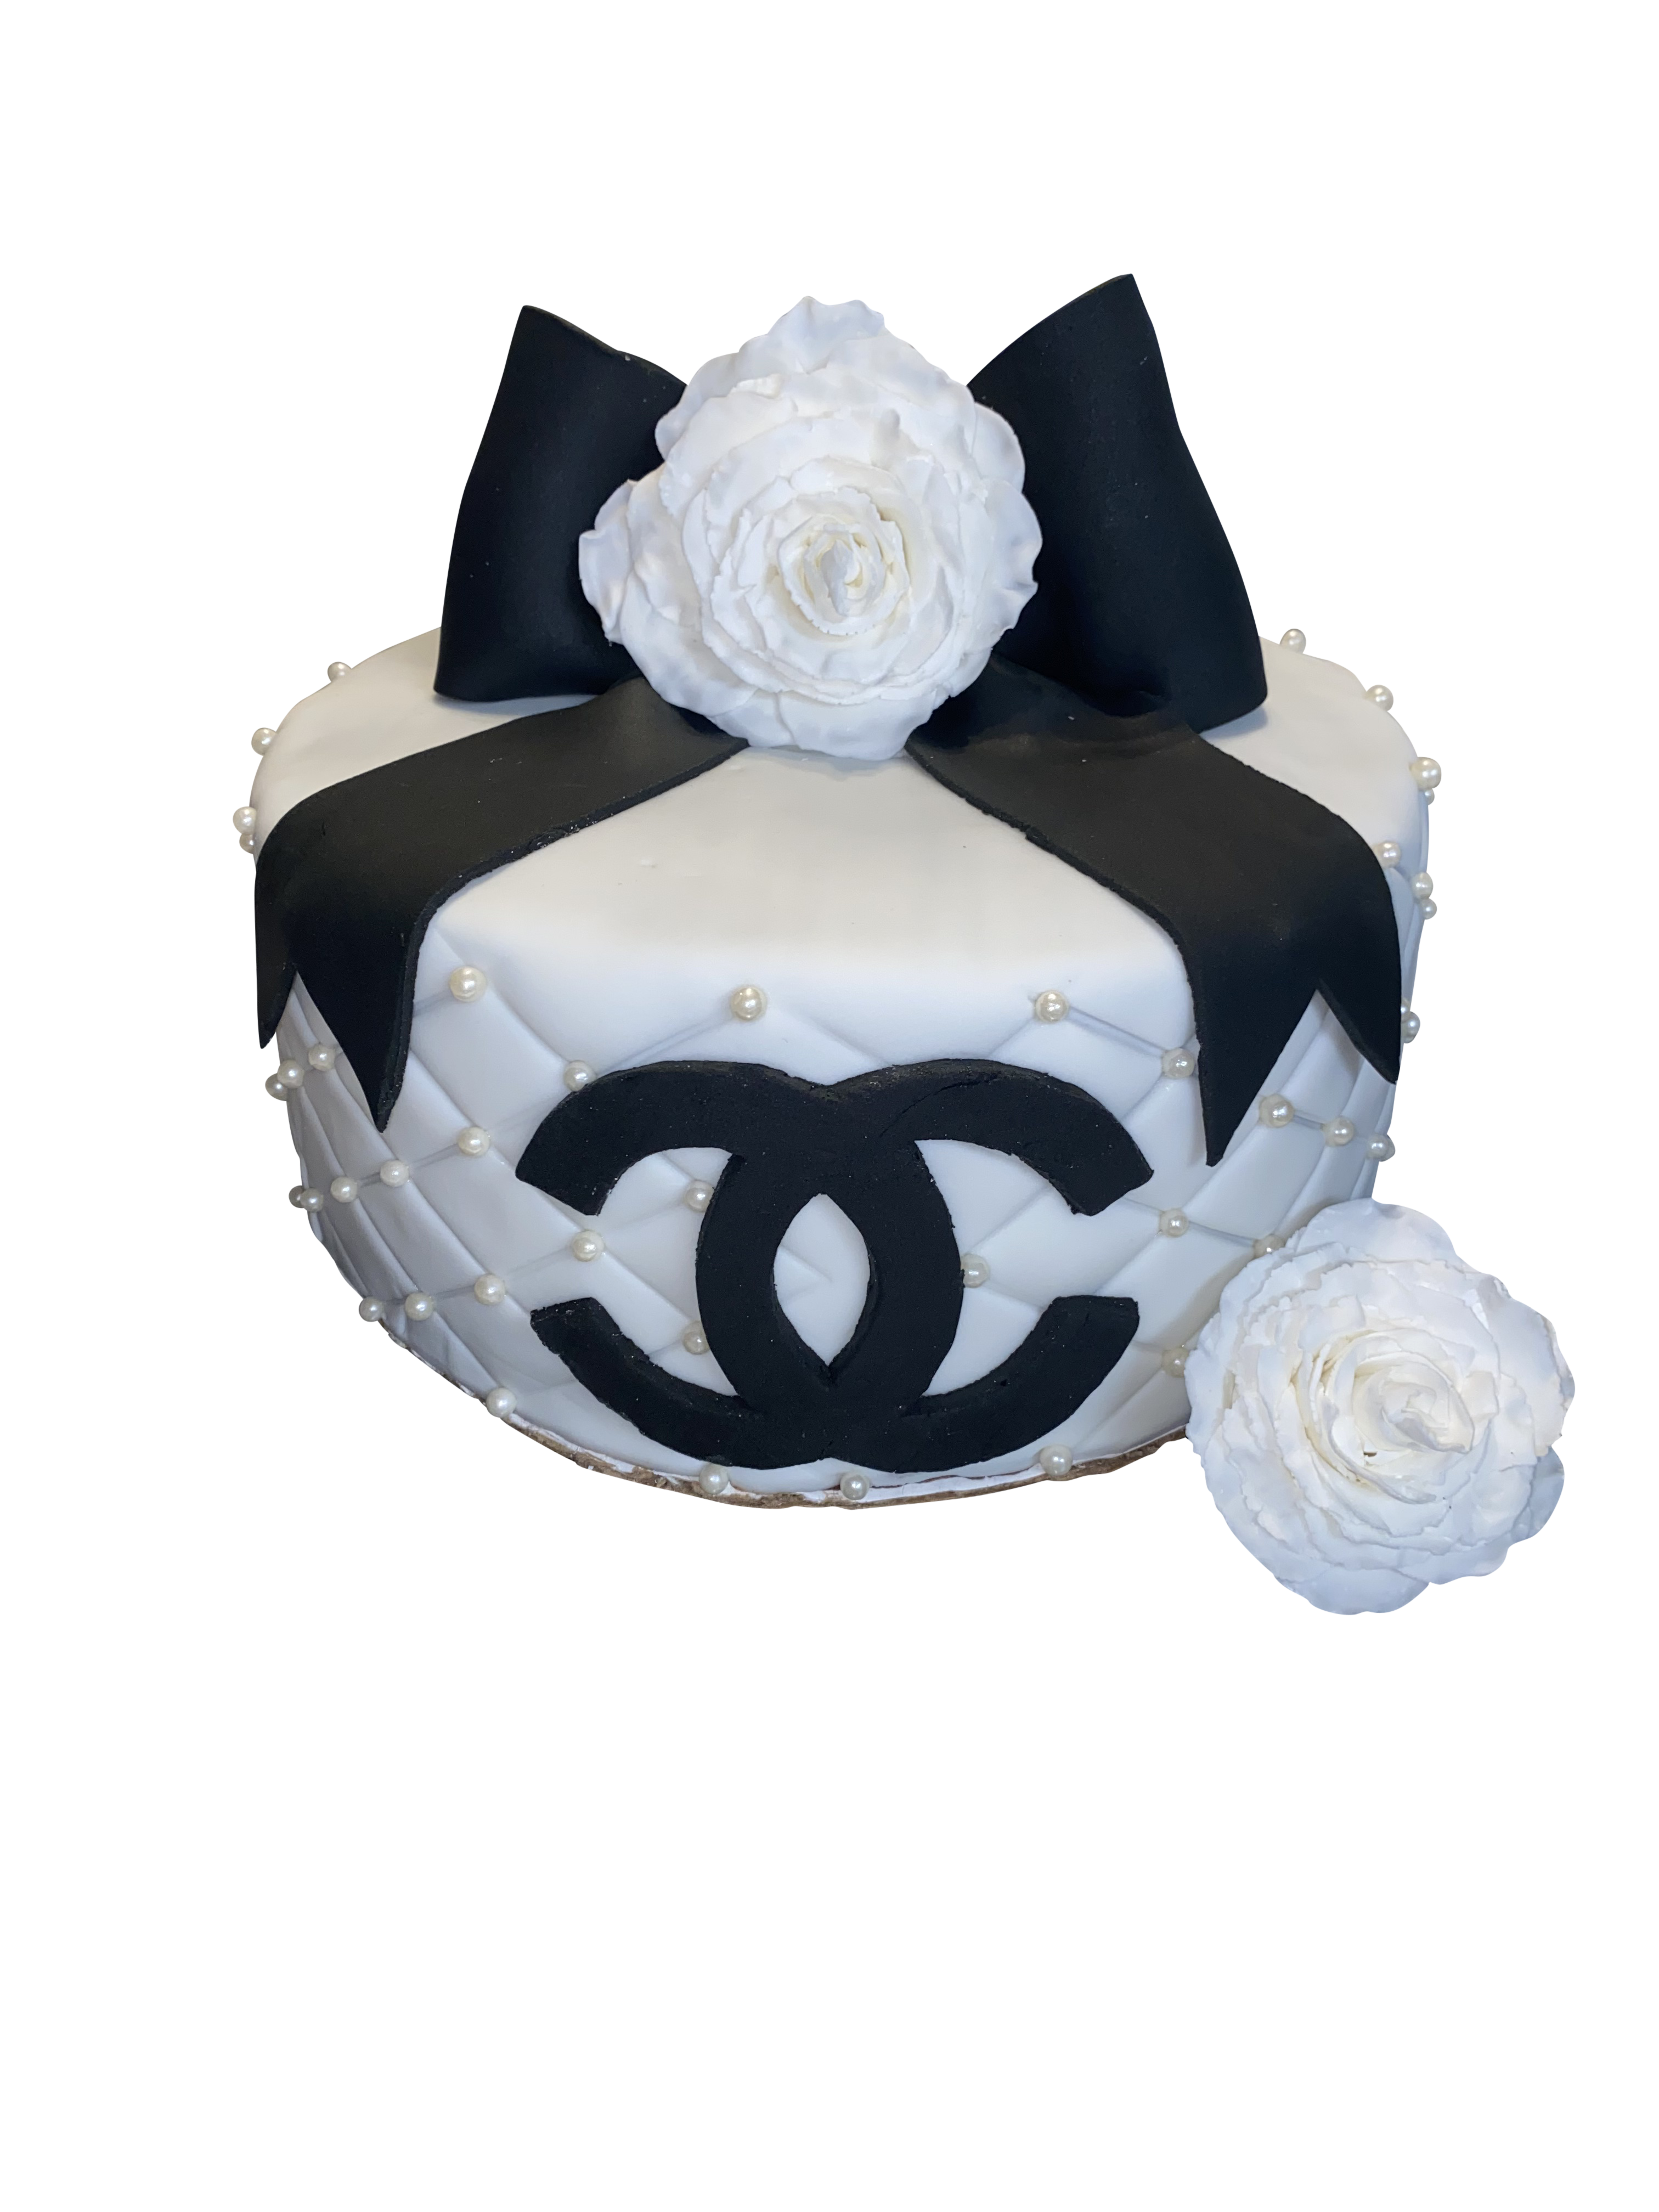 Chanel Inspired 18th Birthday cake - Decorated Cake by - CakesDecor